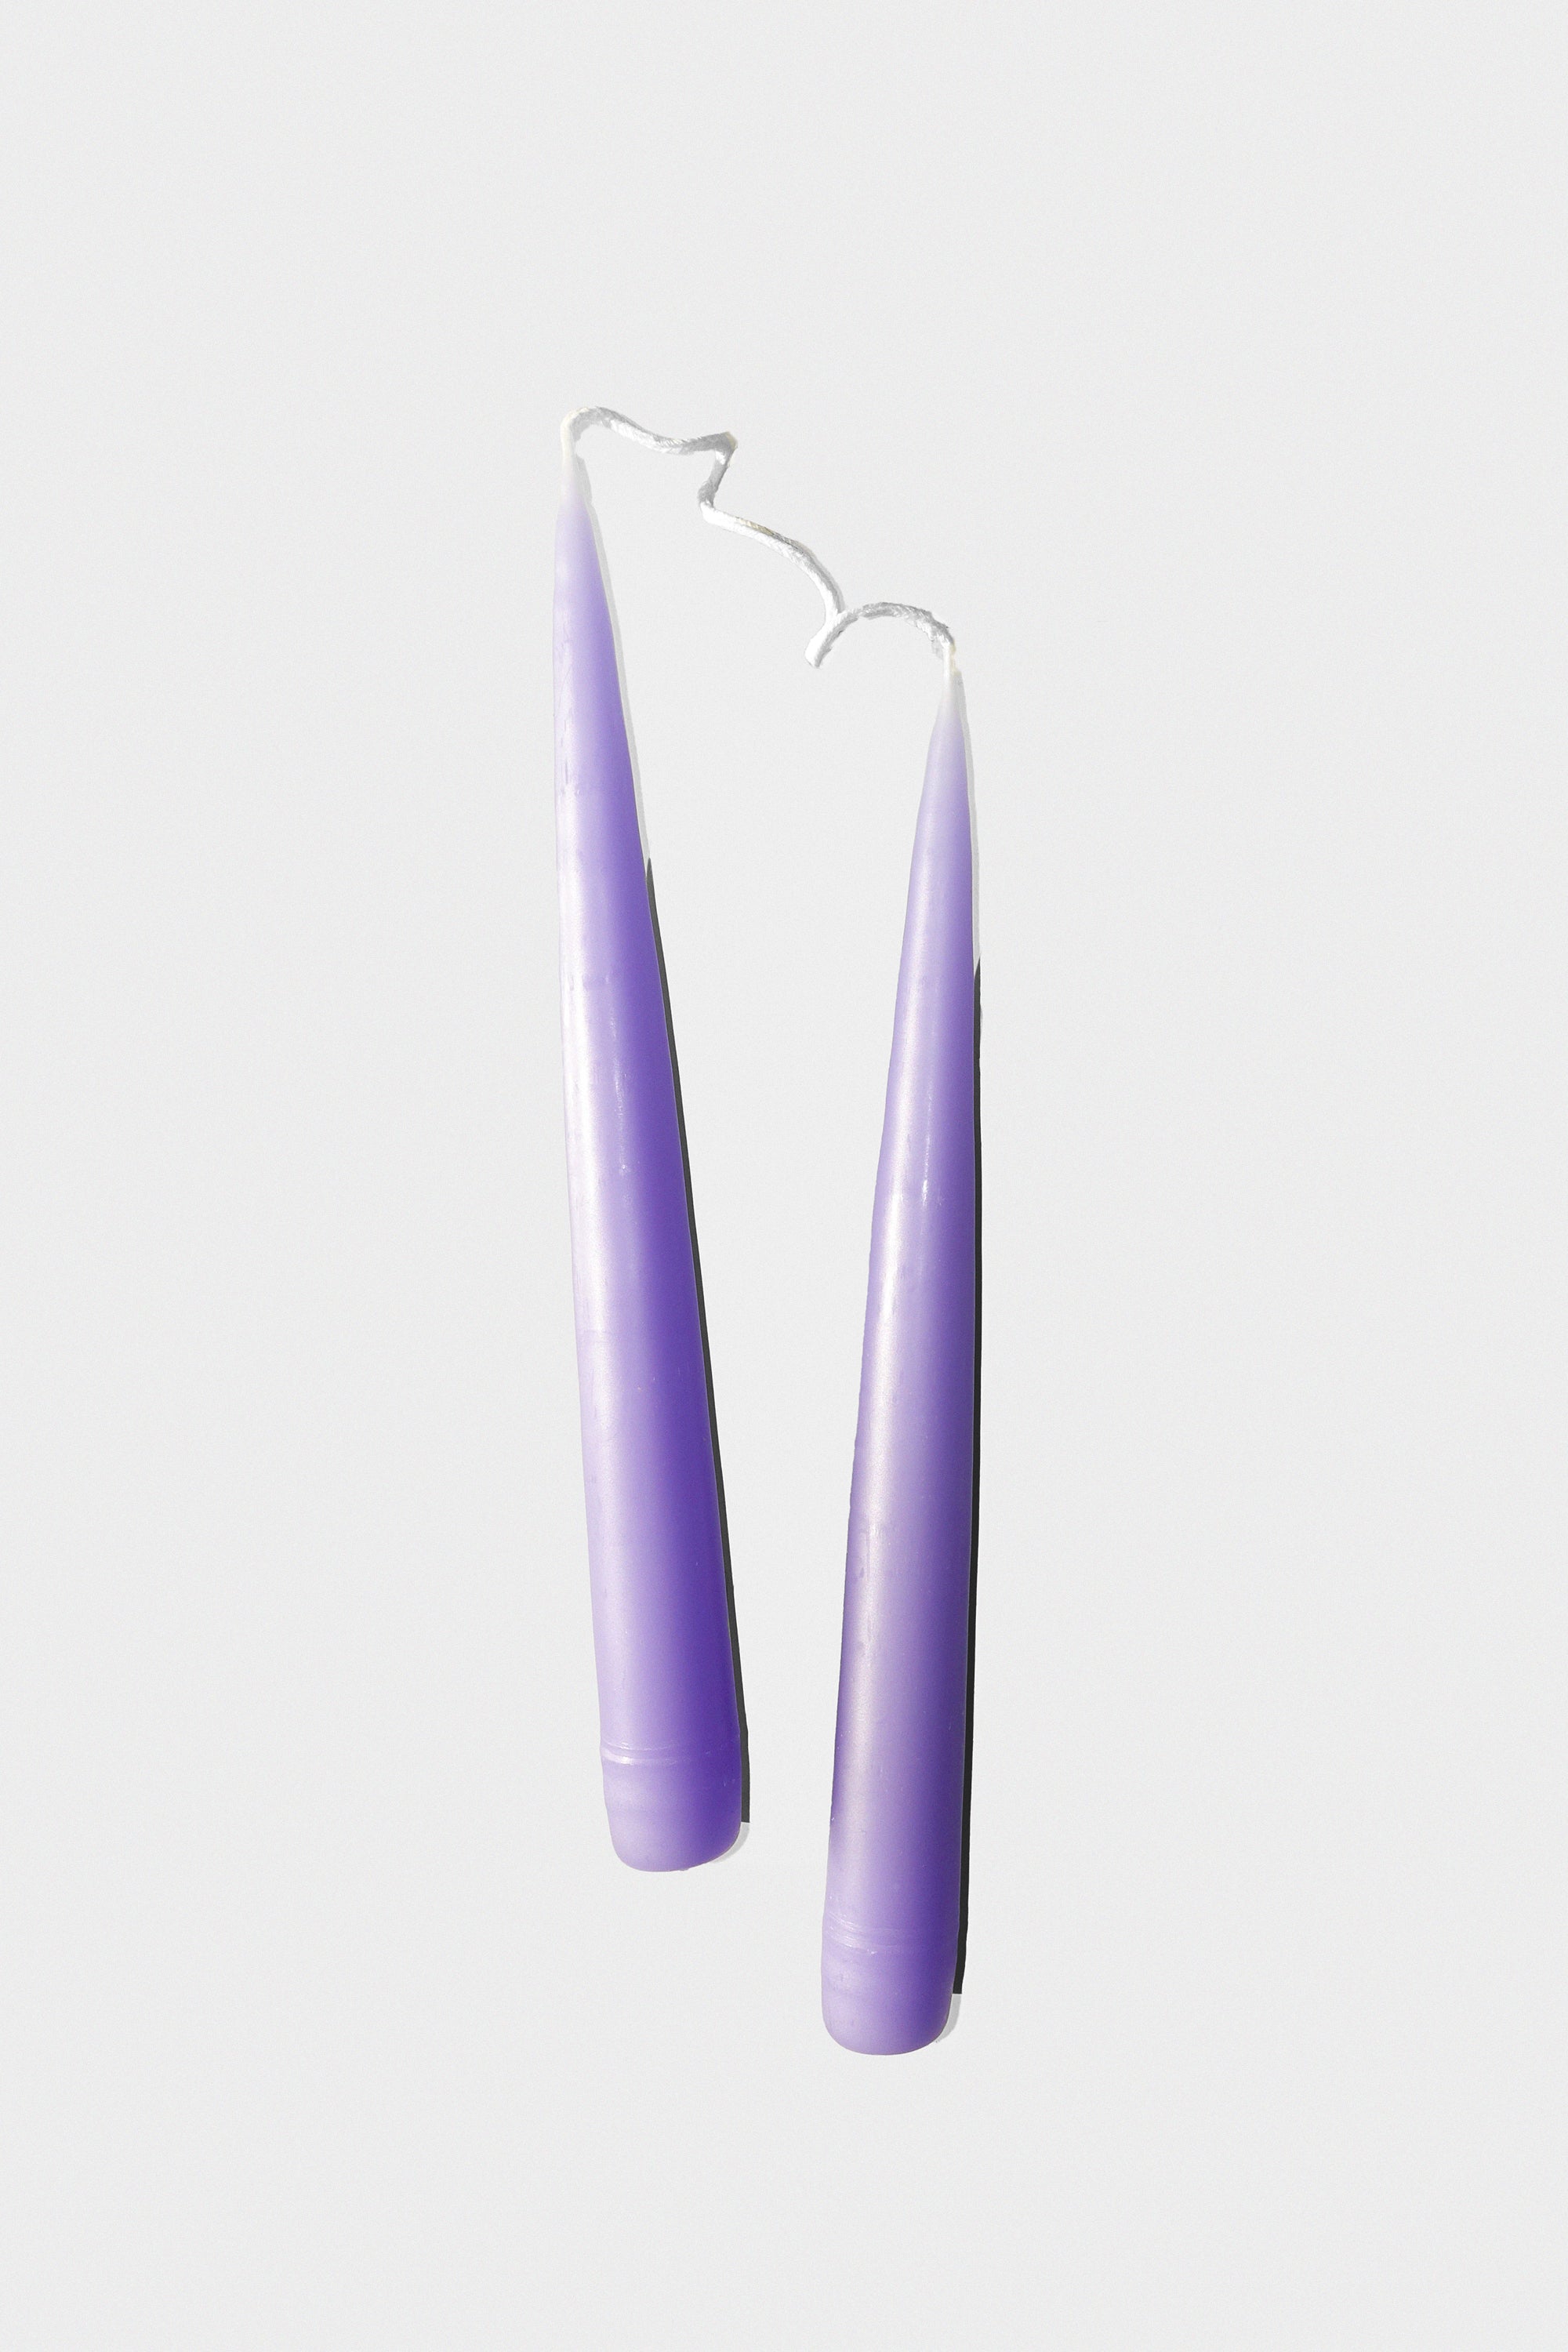 09" Taper Candles in Lavender